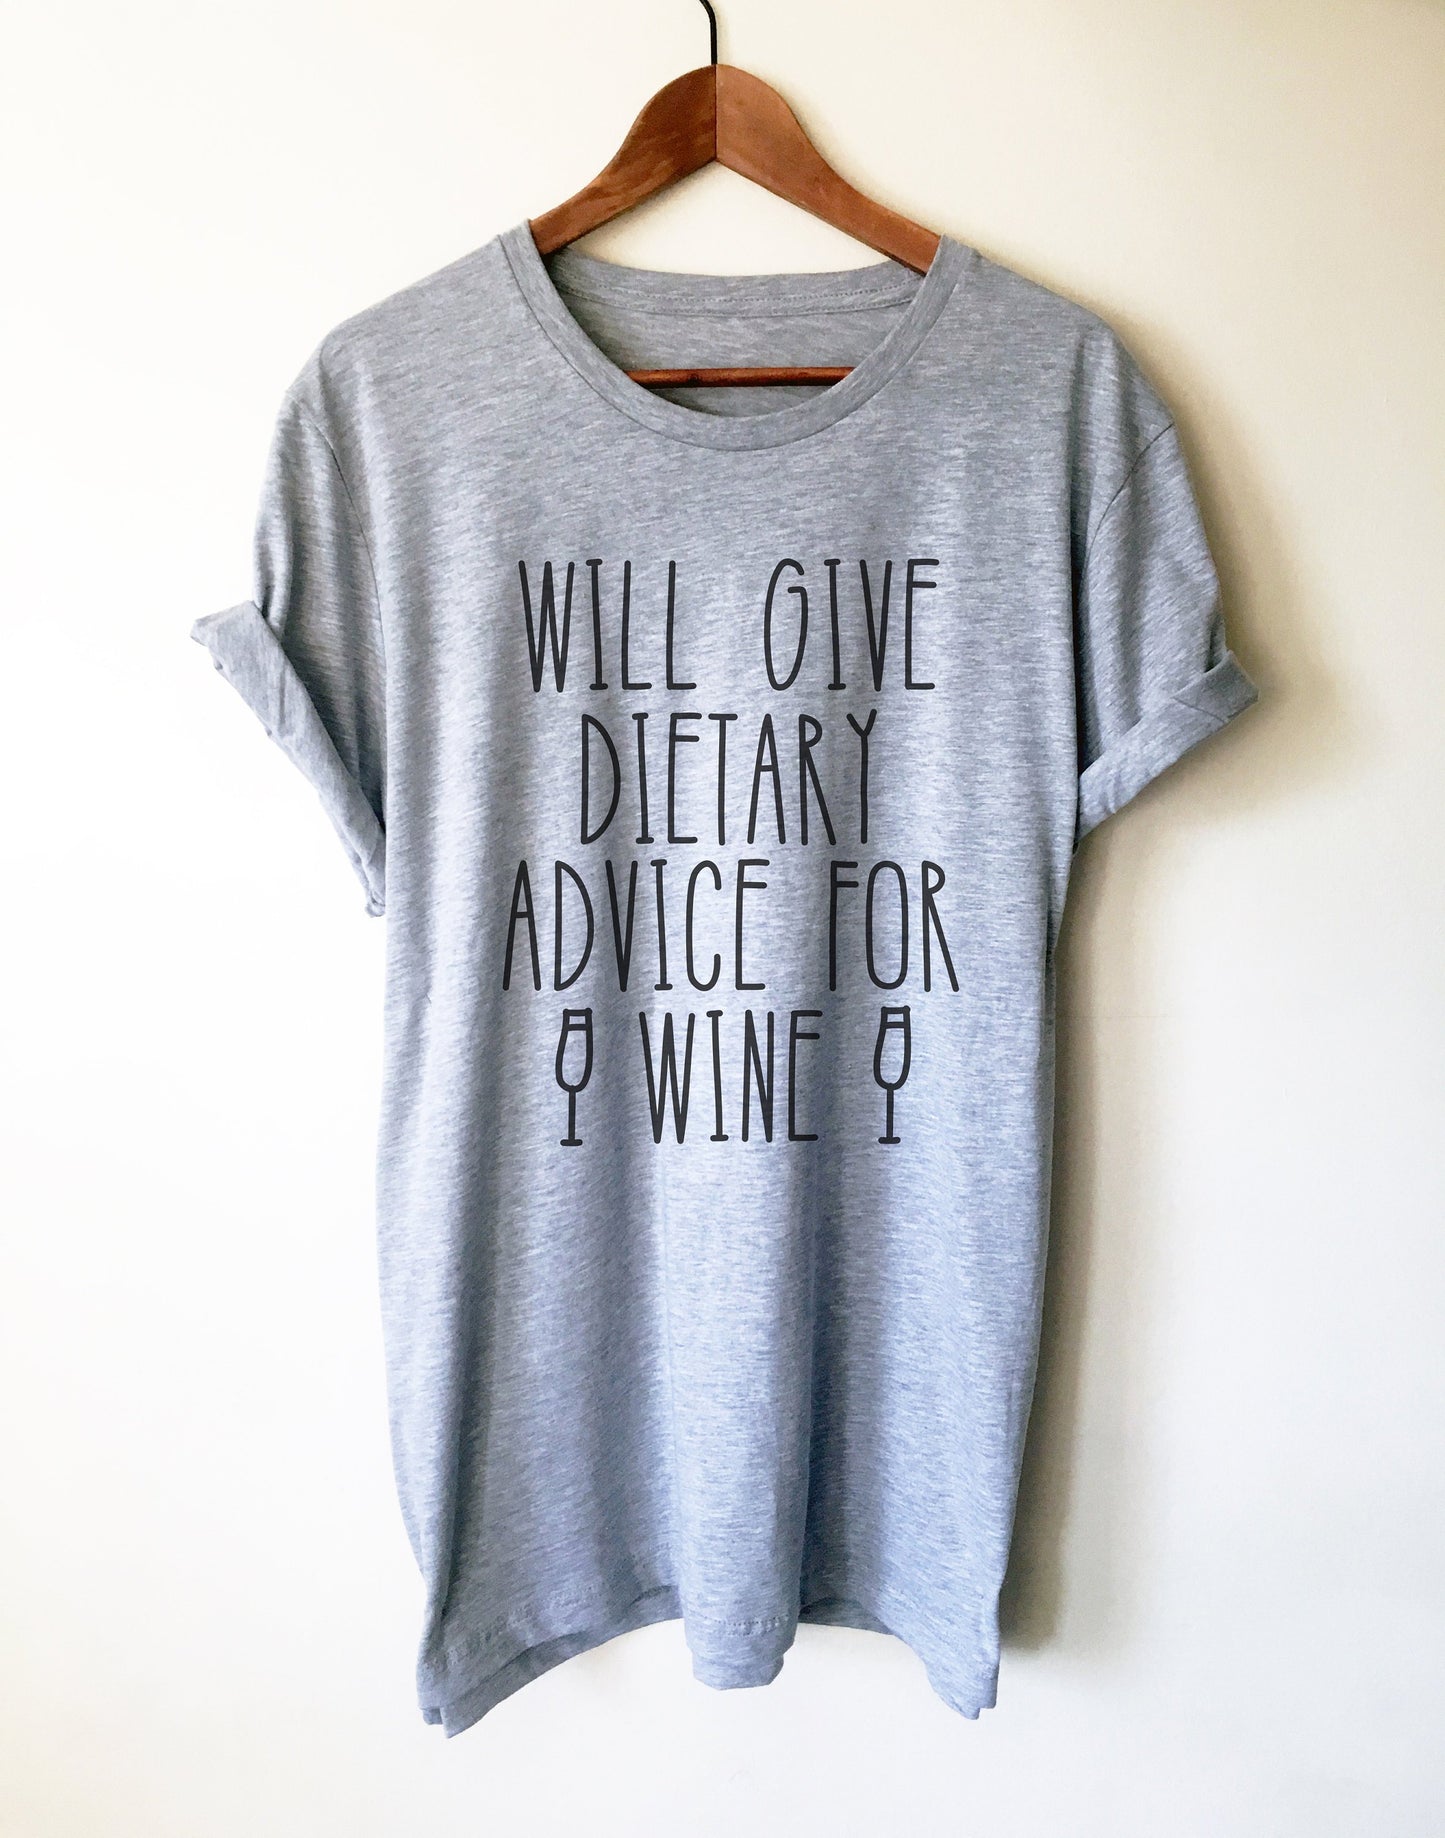 Will Give Dietary Advice For Wine Unisex Shirt -Dietitian Shirt, Dietician Shirt, Nutritionist Shirt,  RDN Shirt, Registered Dietitian Shirt